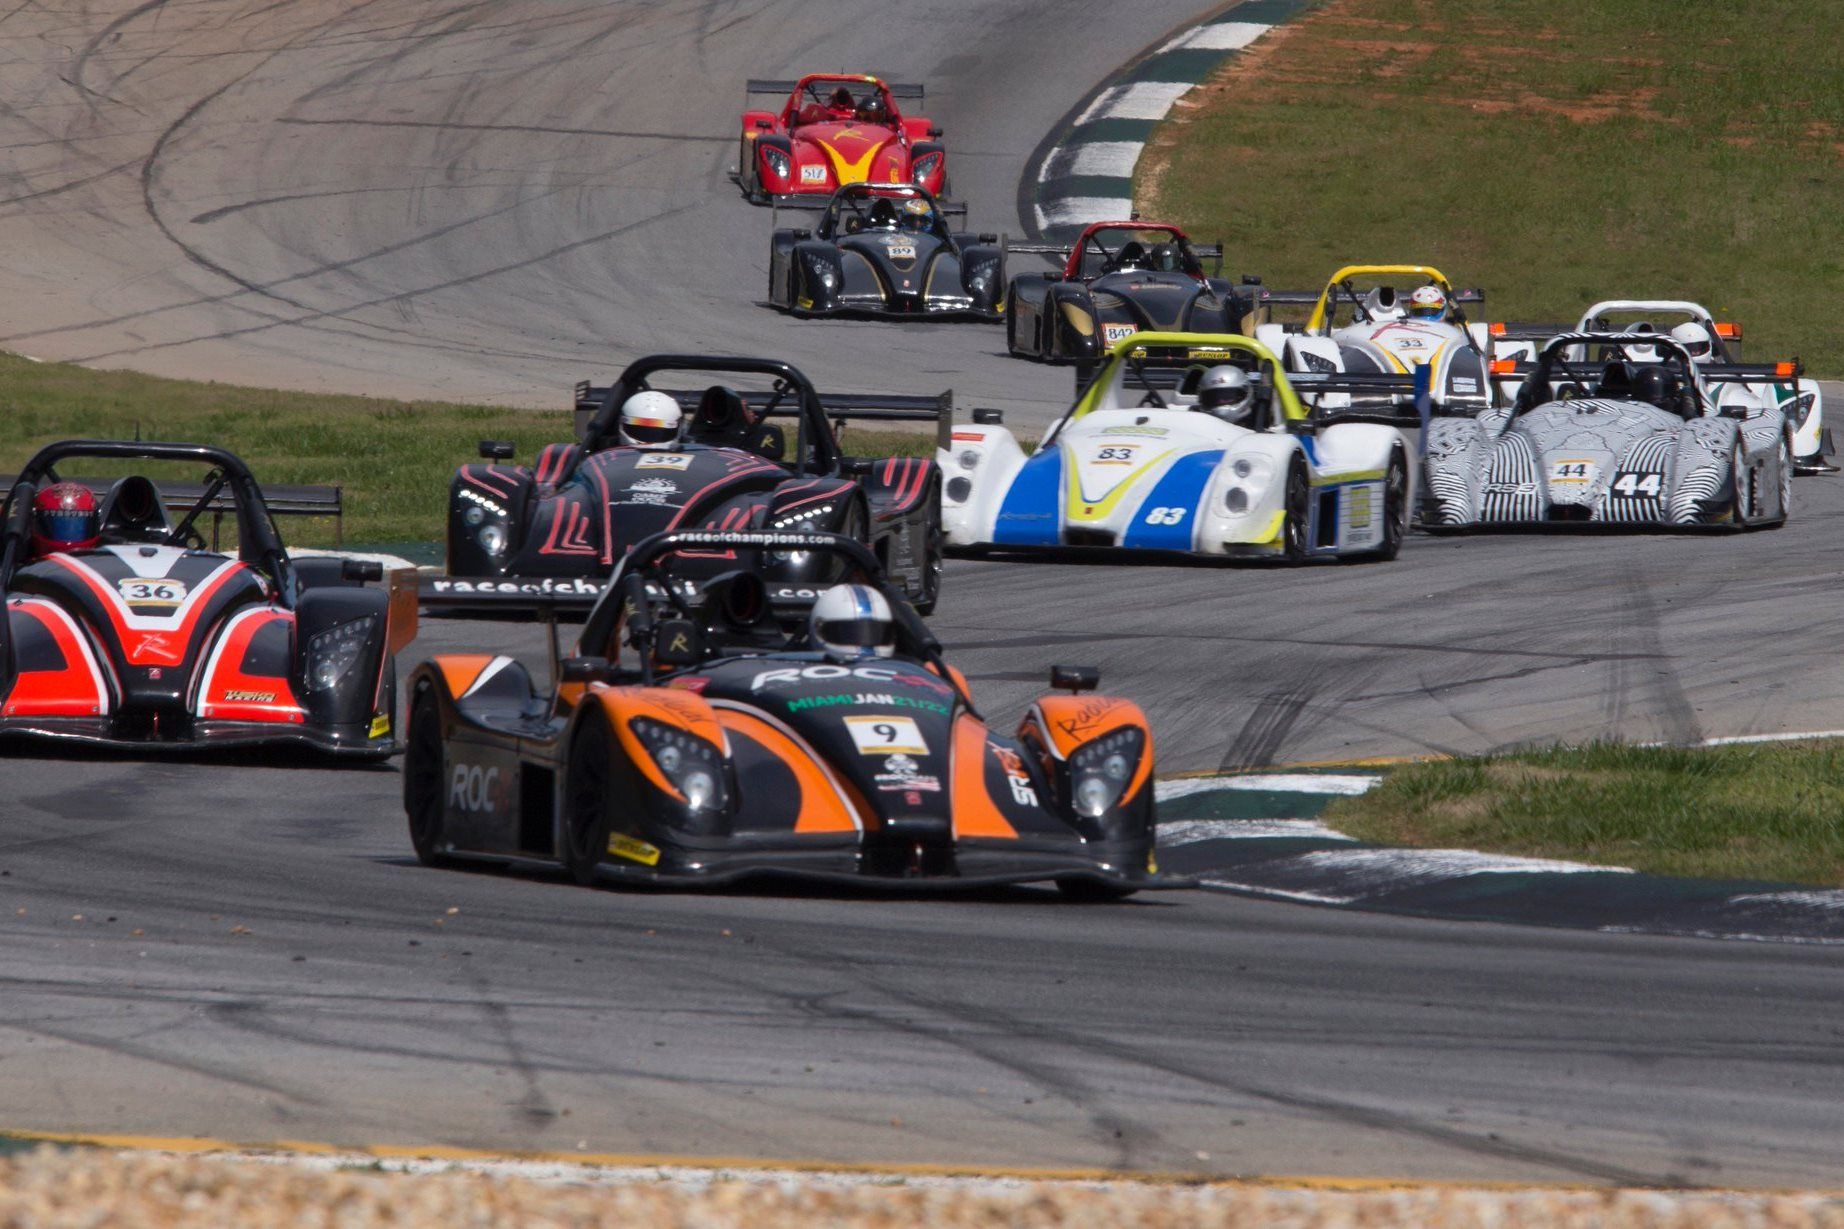 2018 Radical North American Championship to Commence at COTA